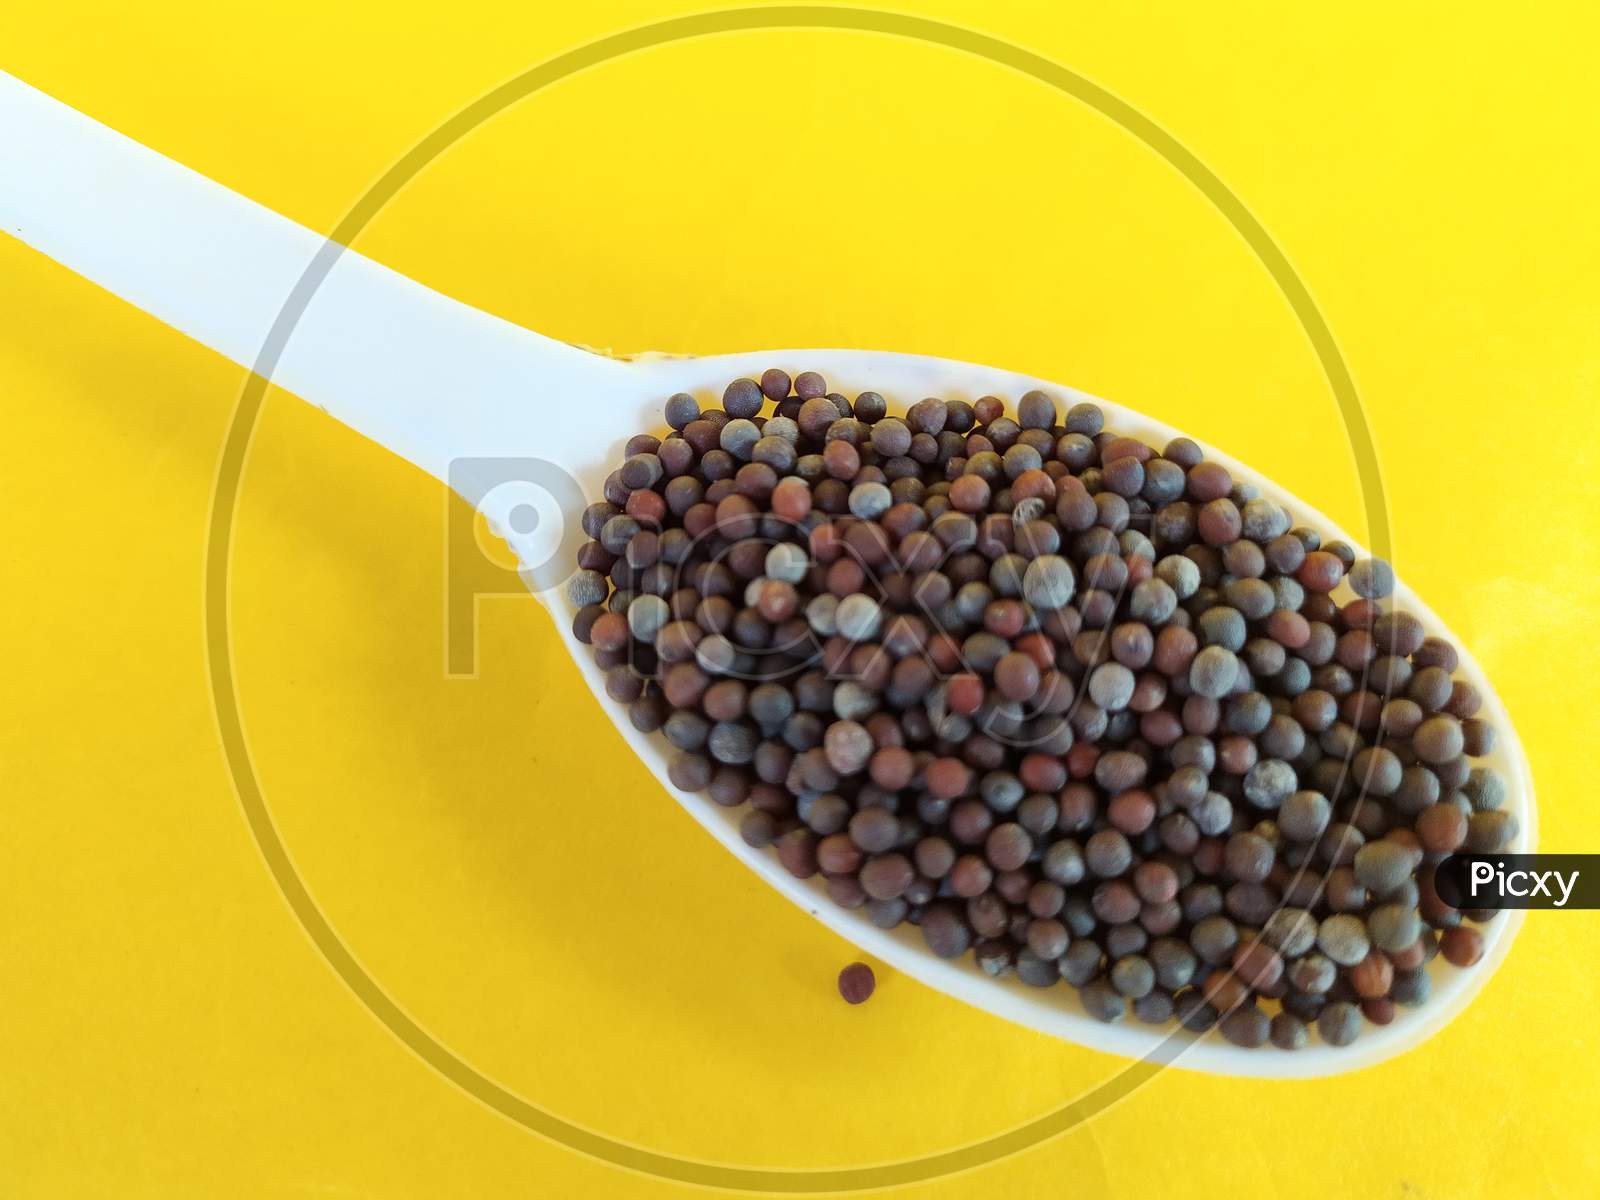 Cooking spice, spoonful mustard seeds on yellow background.